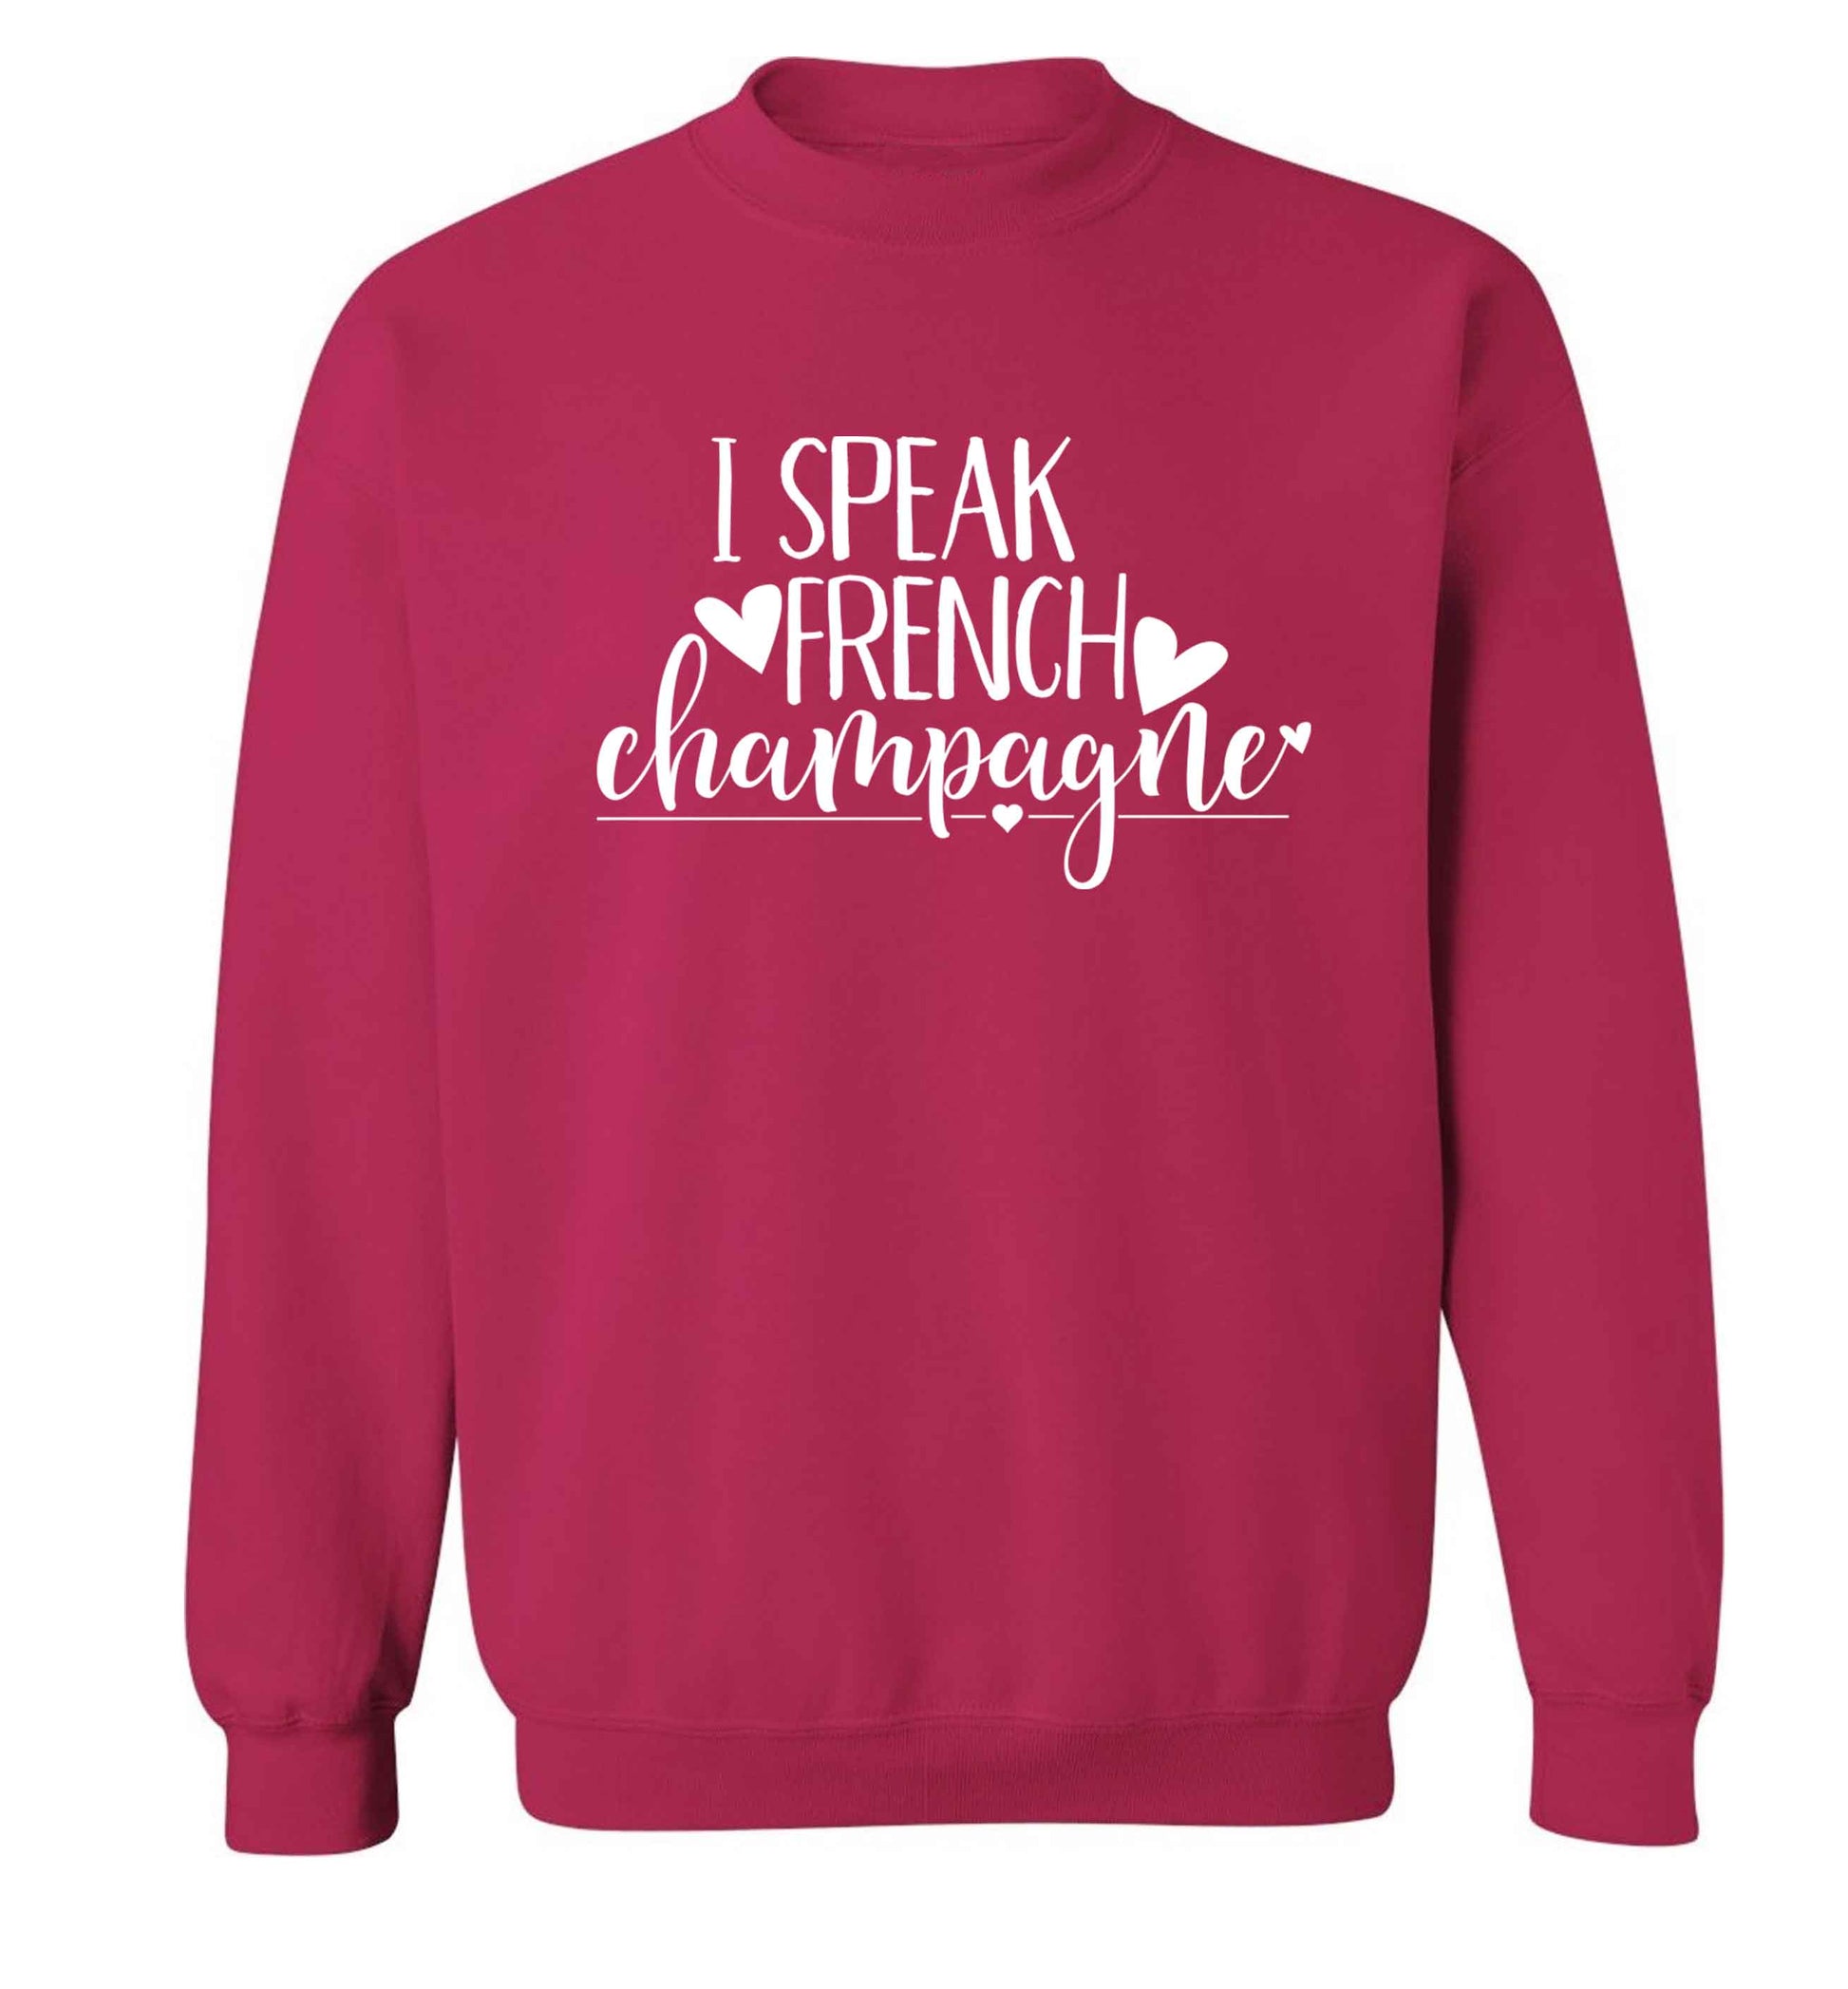 I speak french champagne Adult's unisex pink Sweater 2XL